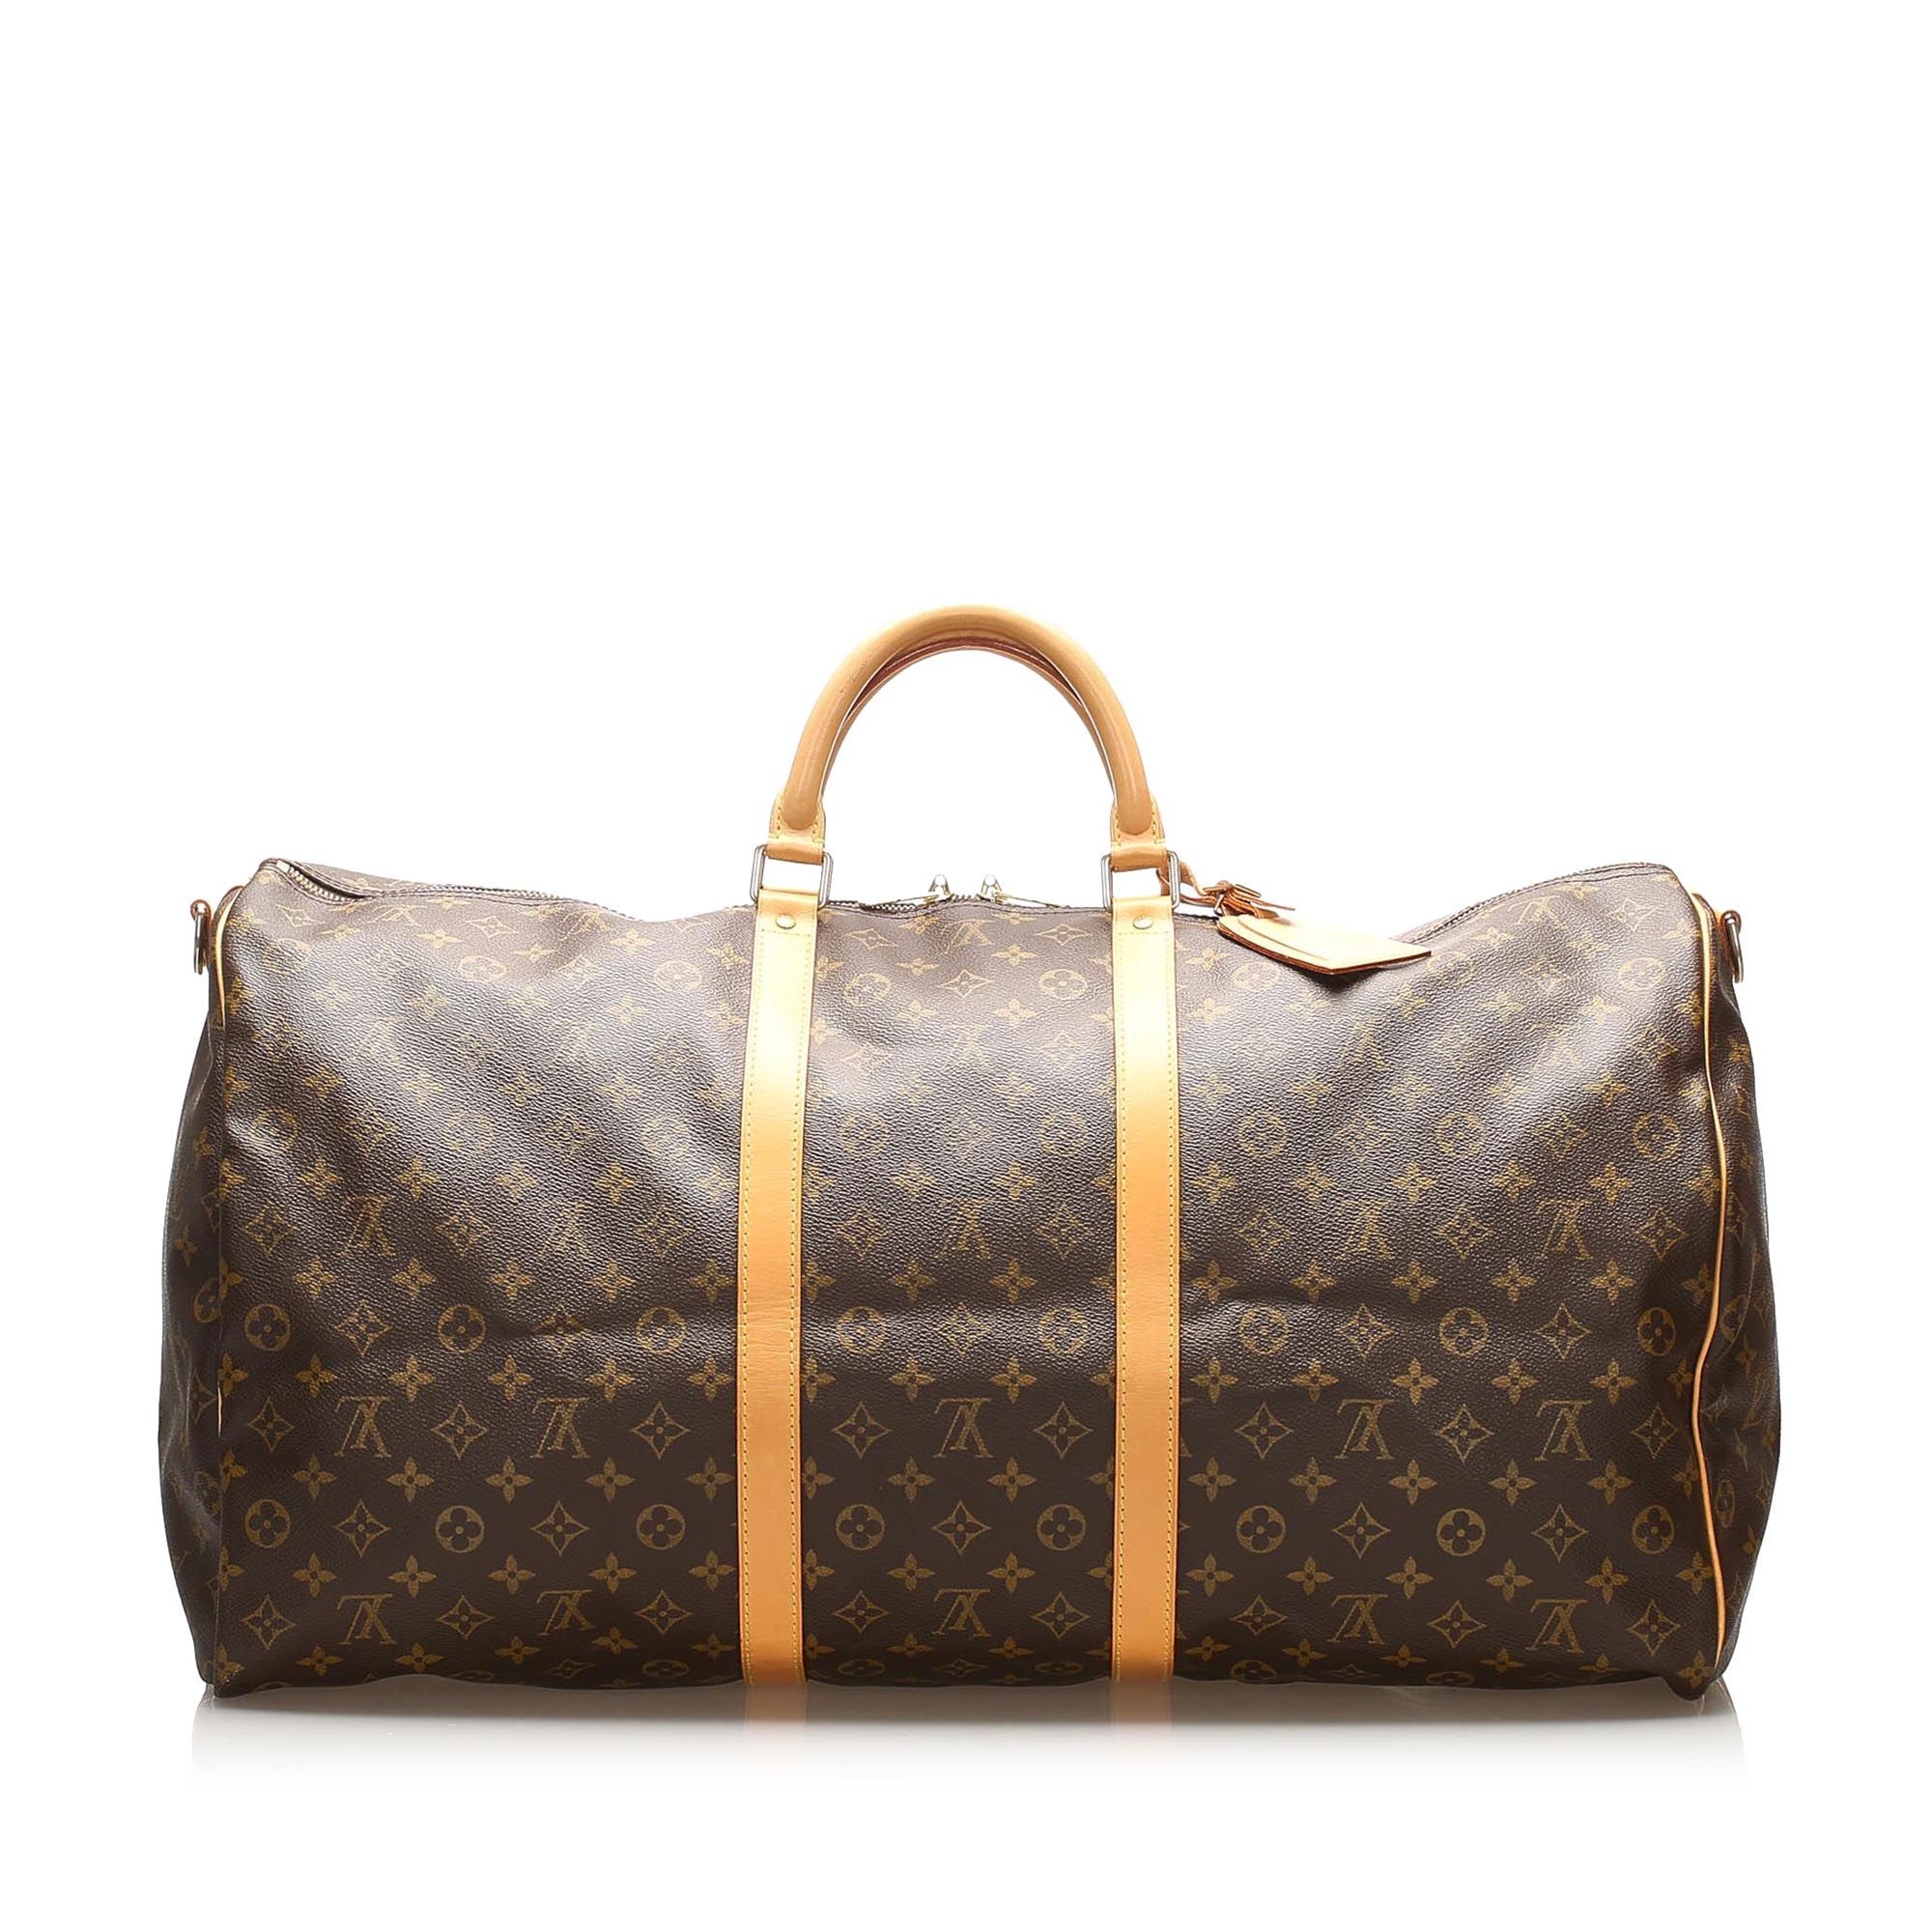 VINTAGE. RRP AS NEW. The Keepall Bandouliere 60 features the Monogram canvas body with vachetta trim, rolled vachetta handles, a detachable flat strap, and a two-way top zip closure.Exterior back is discolored. Exterior bottom is discolored. Exterior corners is discolored and scratched. Exterior front is discolored. Exterior handle is discolored. Exterior side is discolored. Buckle is scratched and tarnished. Zipper is scratched and tarnished.

Dimensions:
Length 34cm
Width 60cm
Depth 26cm
Hand Drop 34cm
Shoulder Drop 120cm

Original Accessories: Name Tag

Serial Number: TH0957
Color: Brown
Material: Canvas x Monogram Canvas x Leather x Vachetta Leather
Country of Origin: France
Boutique Reference: SSU92452K1407


Product Rating: GoodCondition

To help provide you with a wider range of products, this item will be shipped to you from an international warehouse. This means that the delivery may take a little bit longer than usual. Tracking details will be provided for you inside your dispatch email and in your account